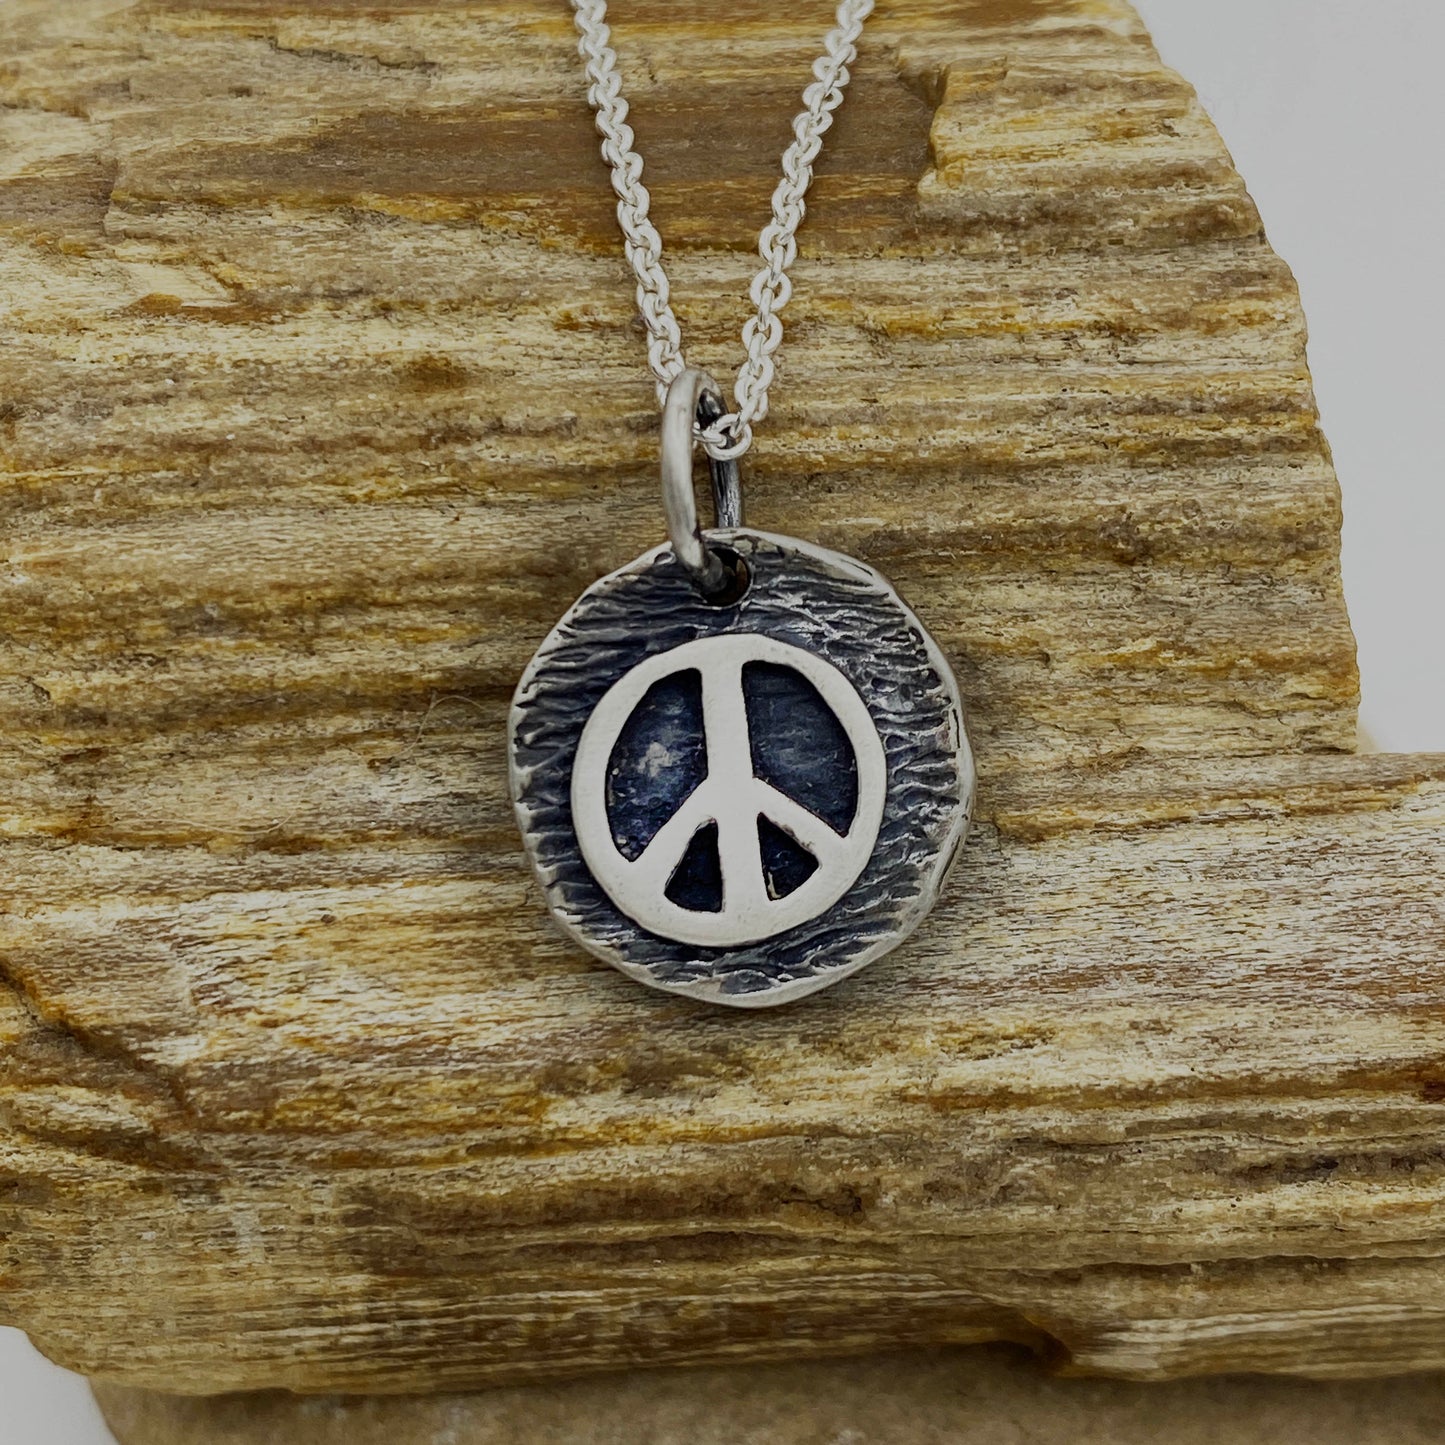 Sterling Silver Peace symbol on top of a Round, flat disc representing the World Pendant with a 22" Adjustable Cable Chain